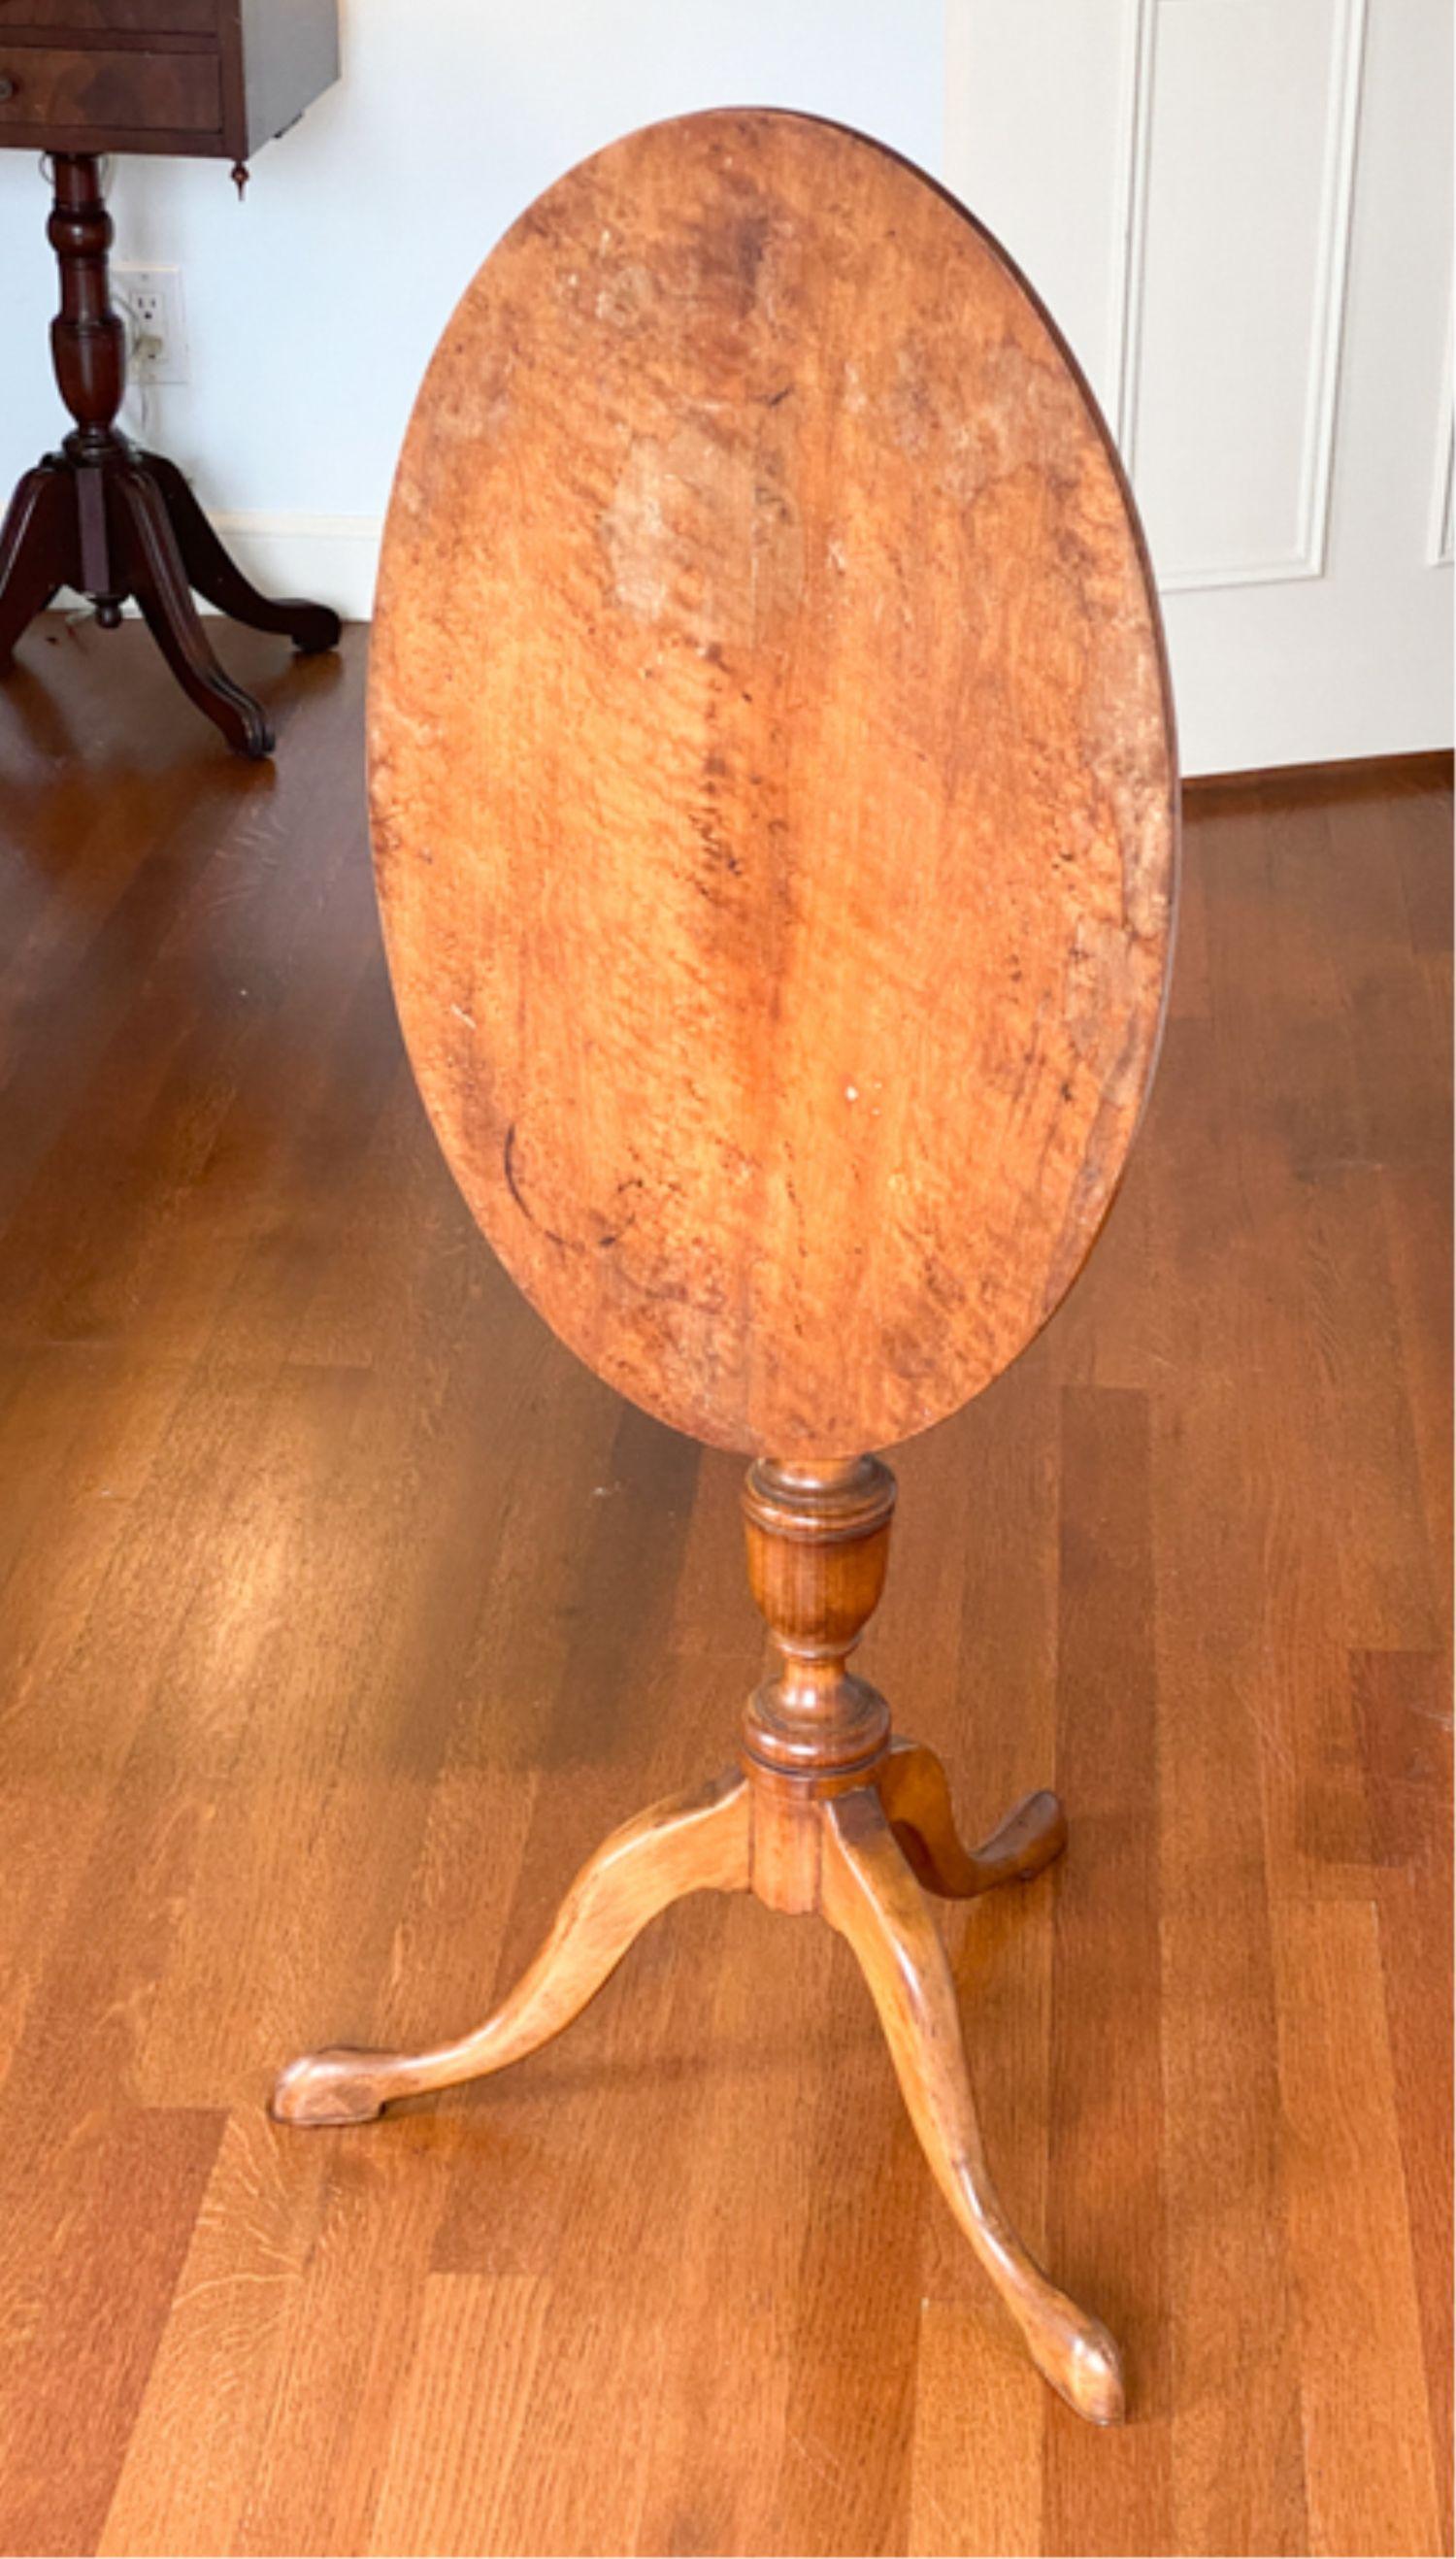 18th-Century antique tiger maple tilt-top Queen Anne tea table in an unusual oval shape. Item features remarkable tiger stripe wood grain, Queen Anne tripod base, fantastic patina, very nice table.
Measurements: 26